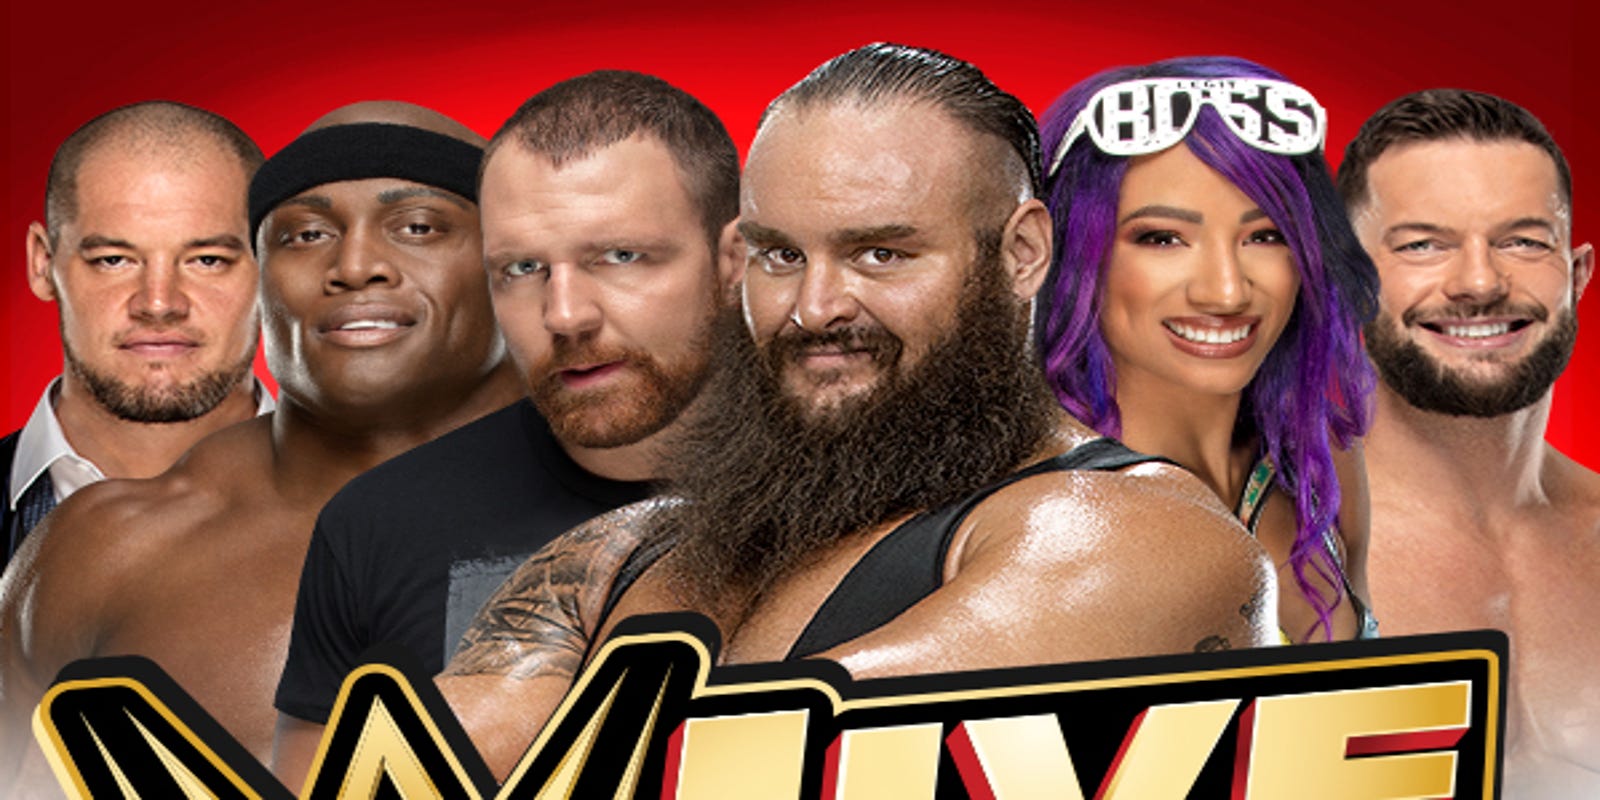 WWE Live Road to WrestleMania comes to Salisbury on March 1